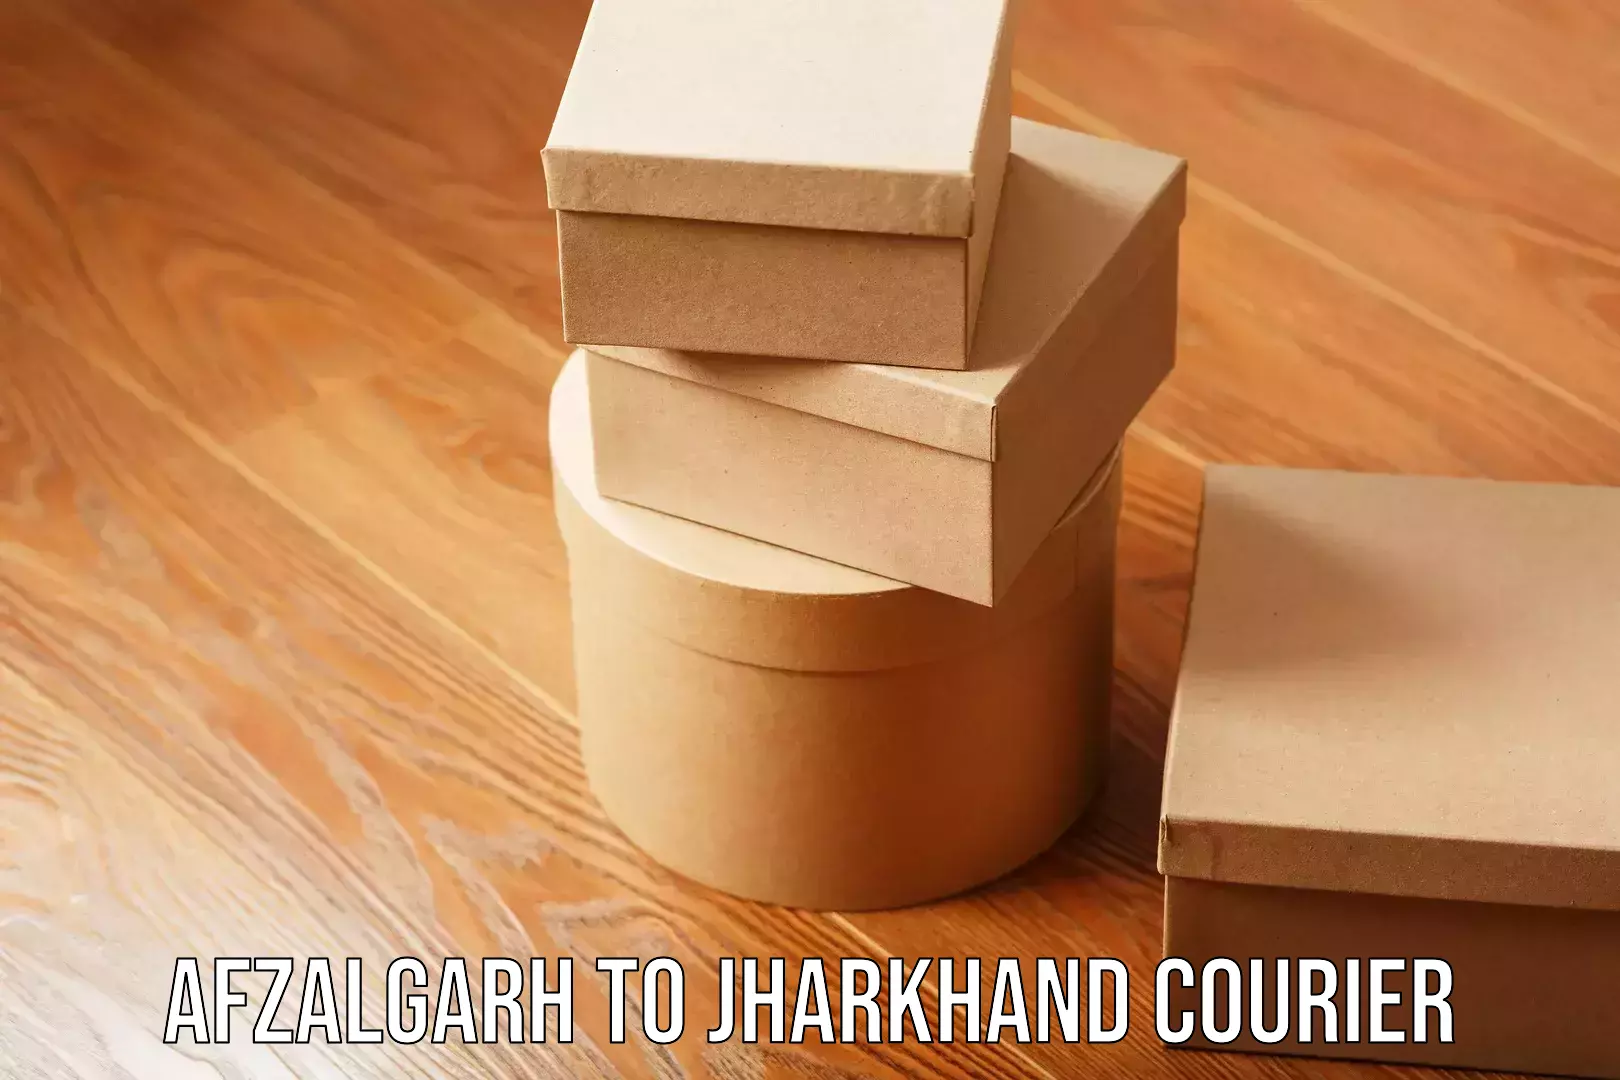 Express delivery solutions Afzalgarh to Jharkhand